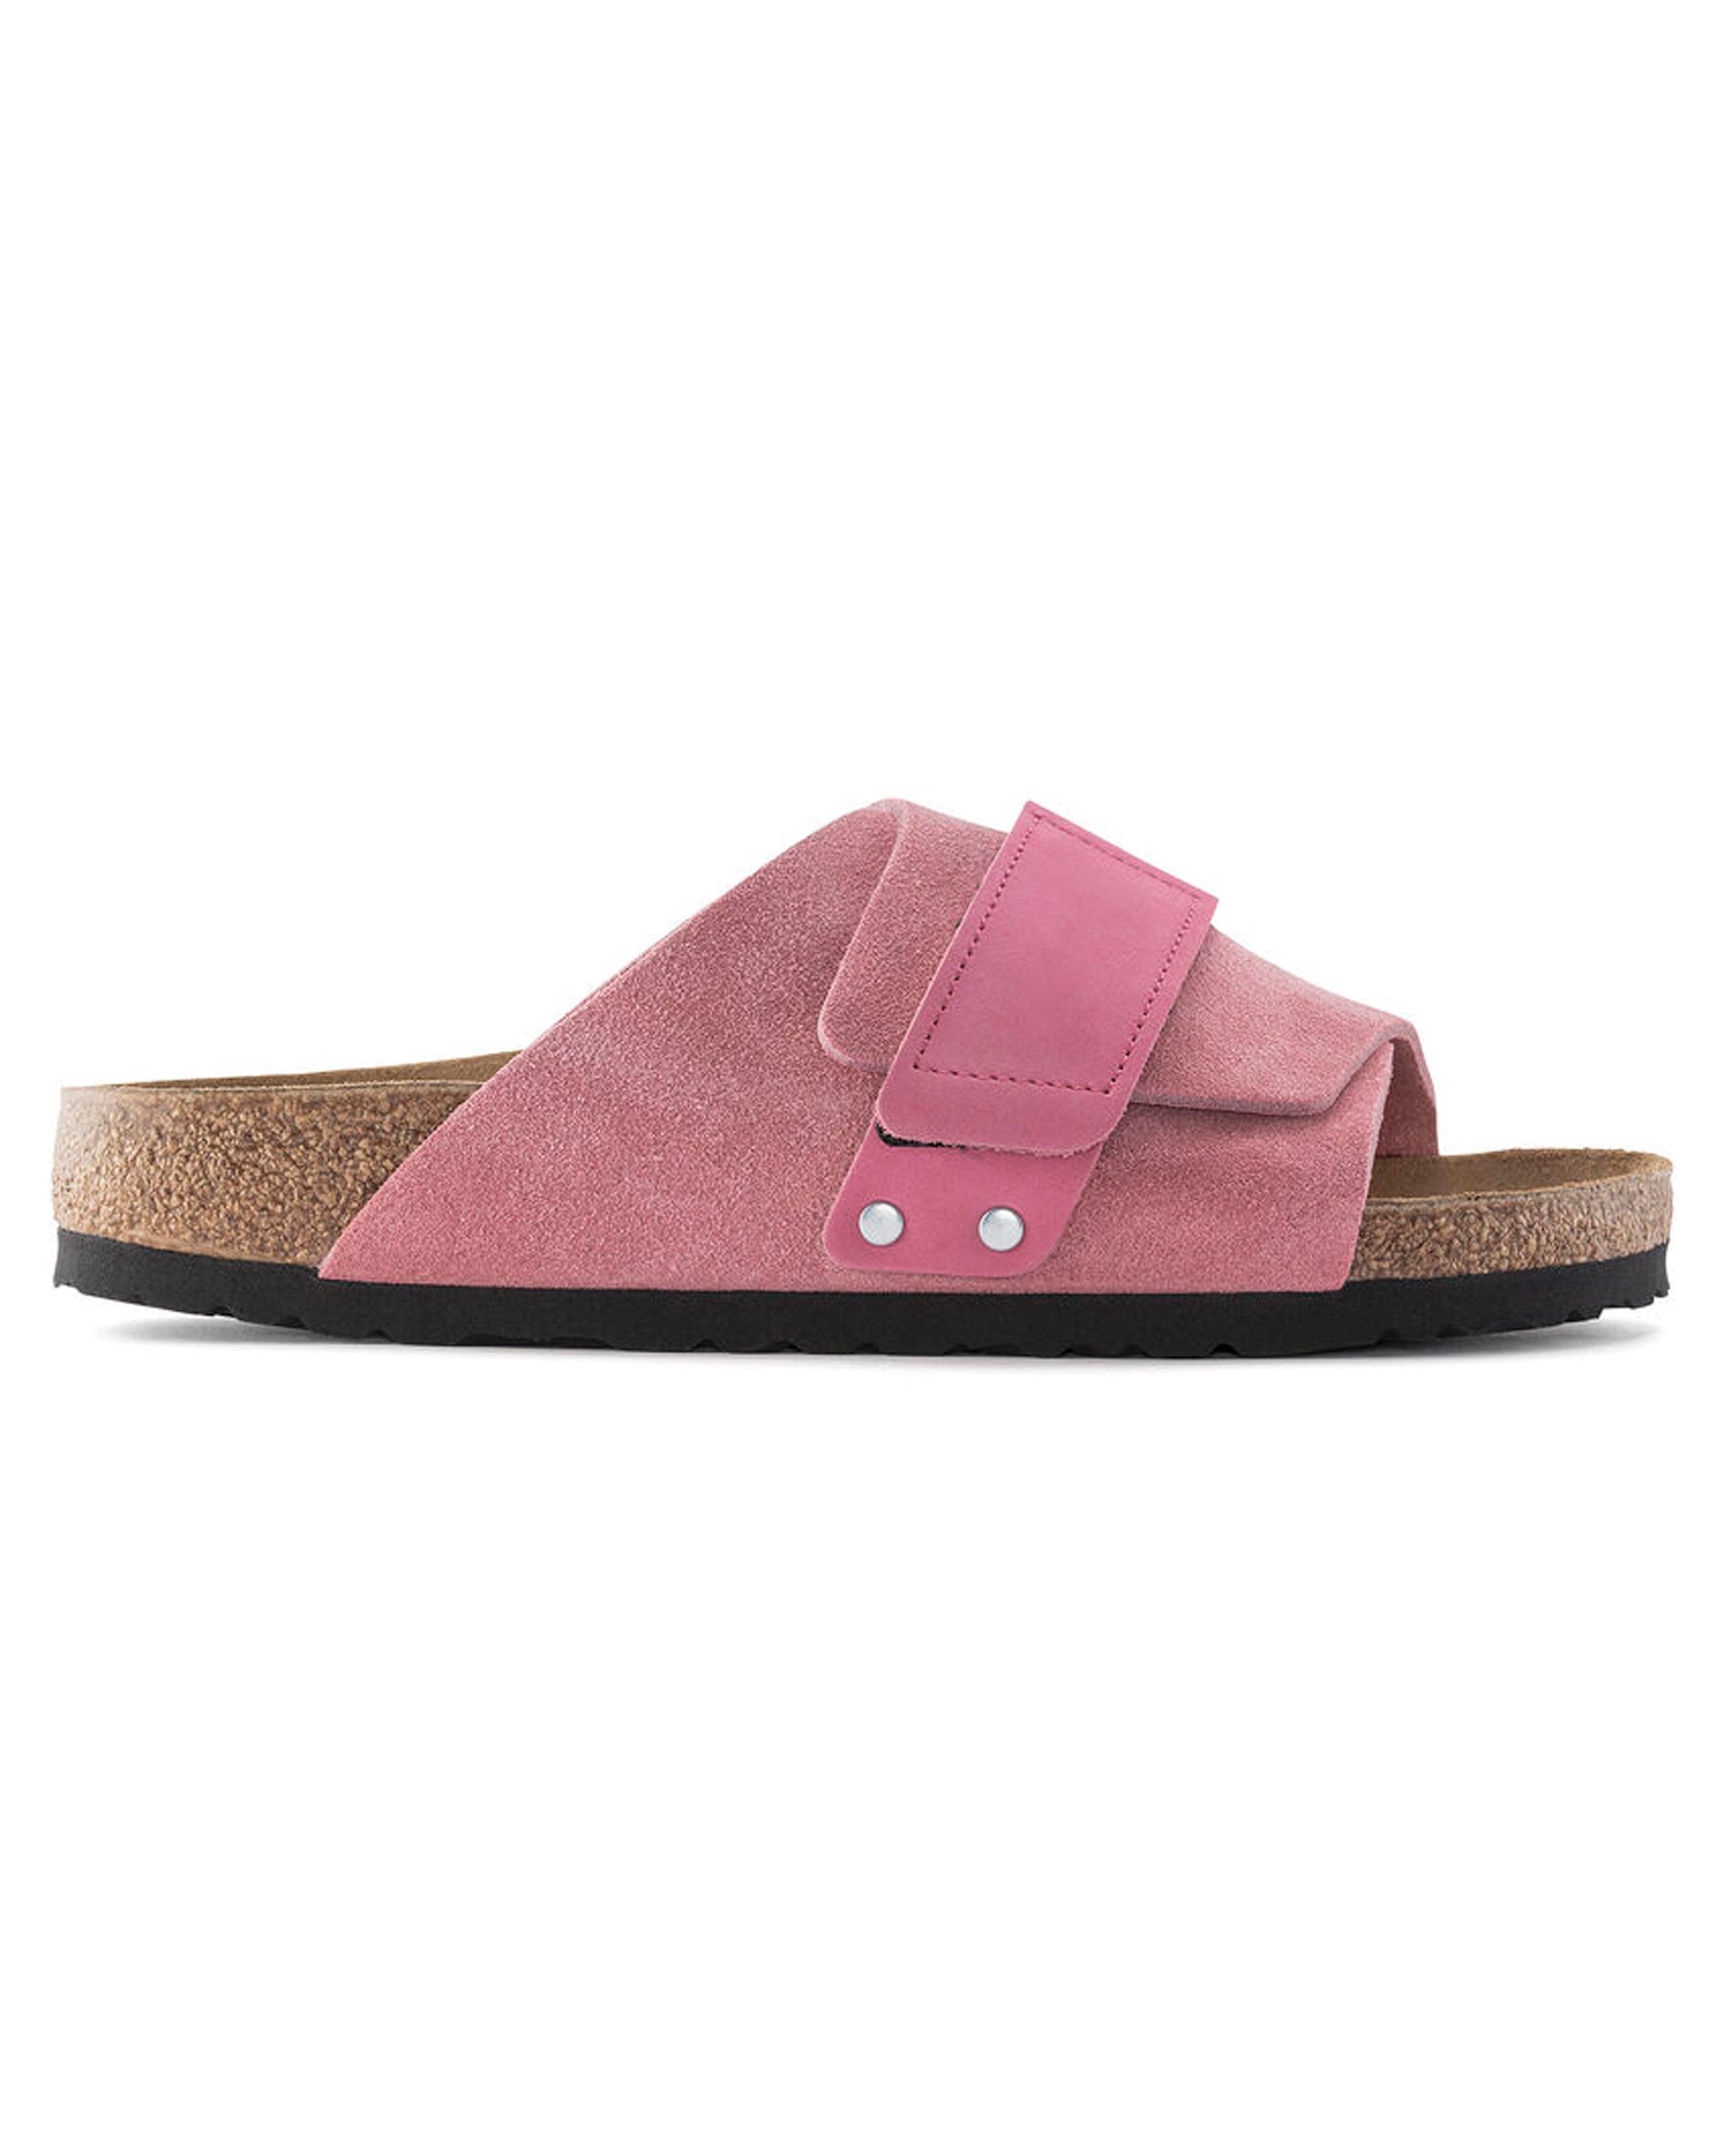 Kyoto Candy Pink Suede Leather Sandals